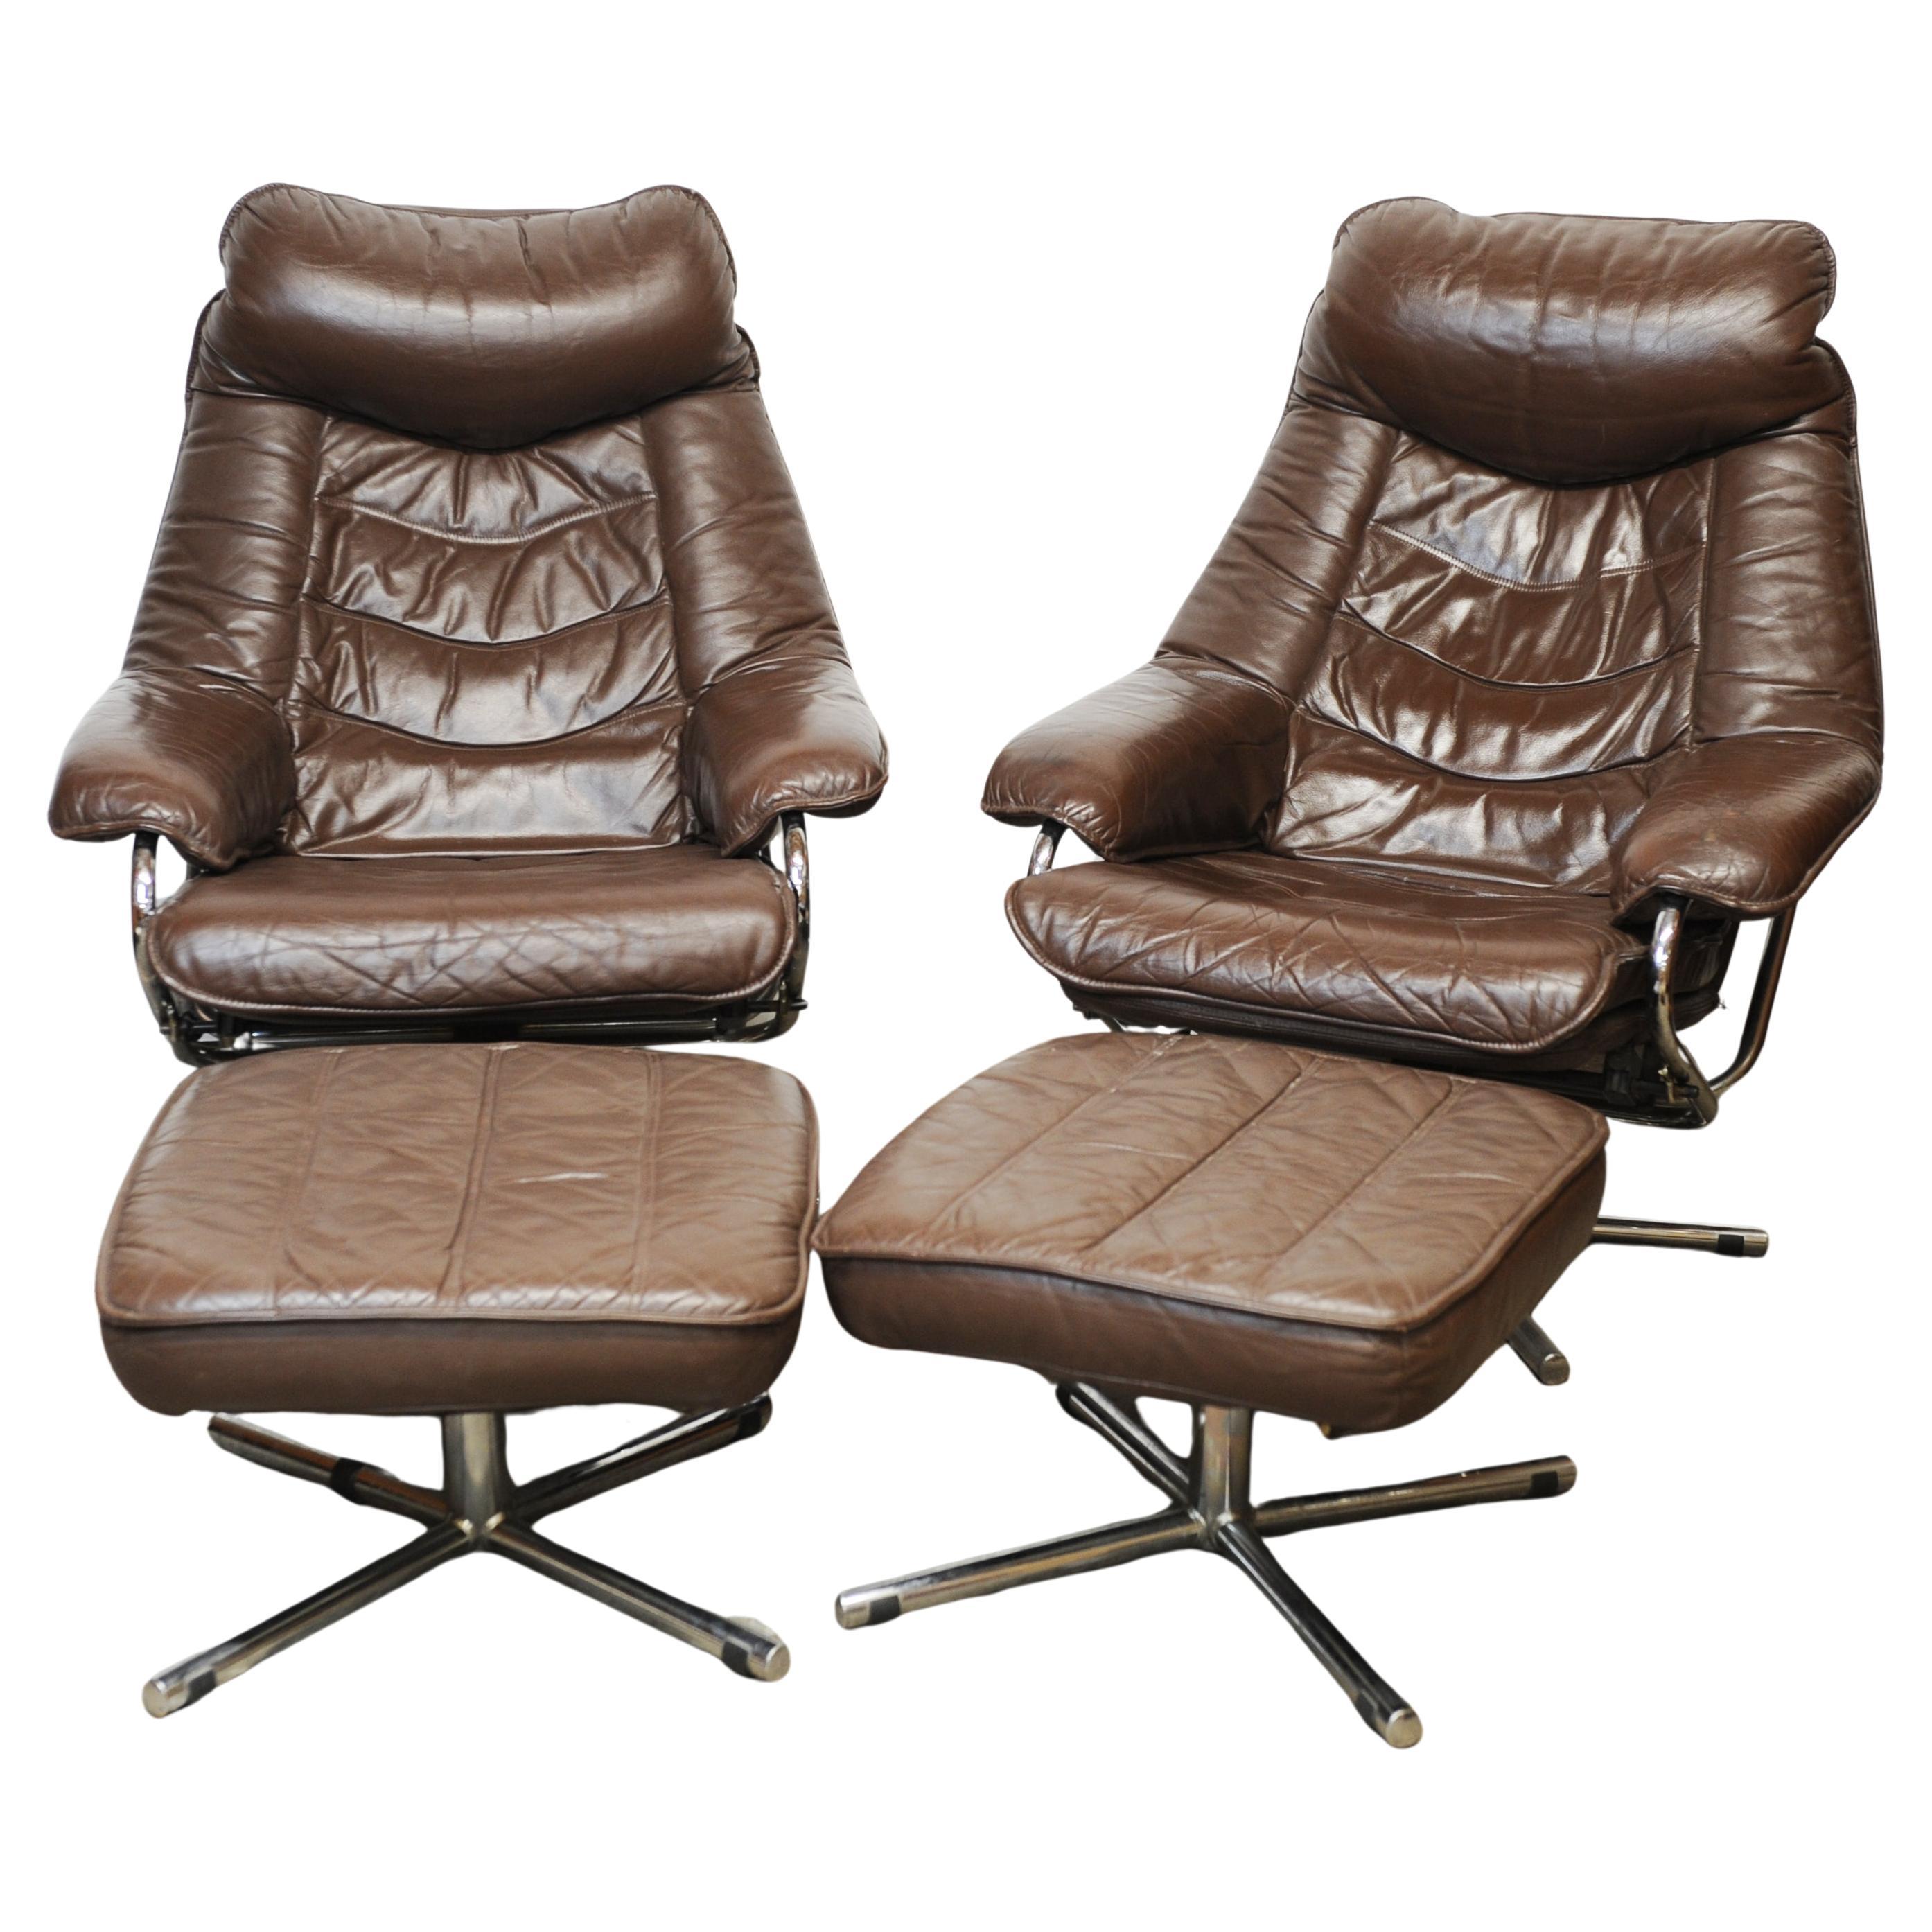 Pair of Norwegian Lounge Chairs with Footstools in Brown Leather by Skoghaus 